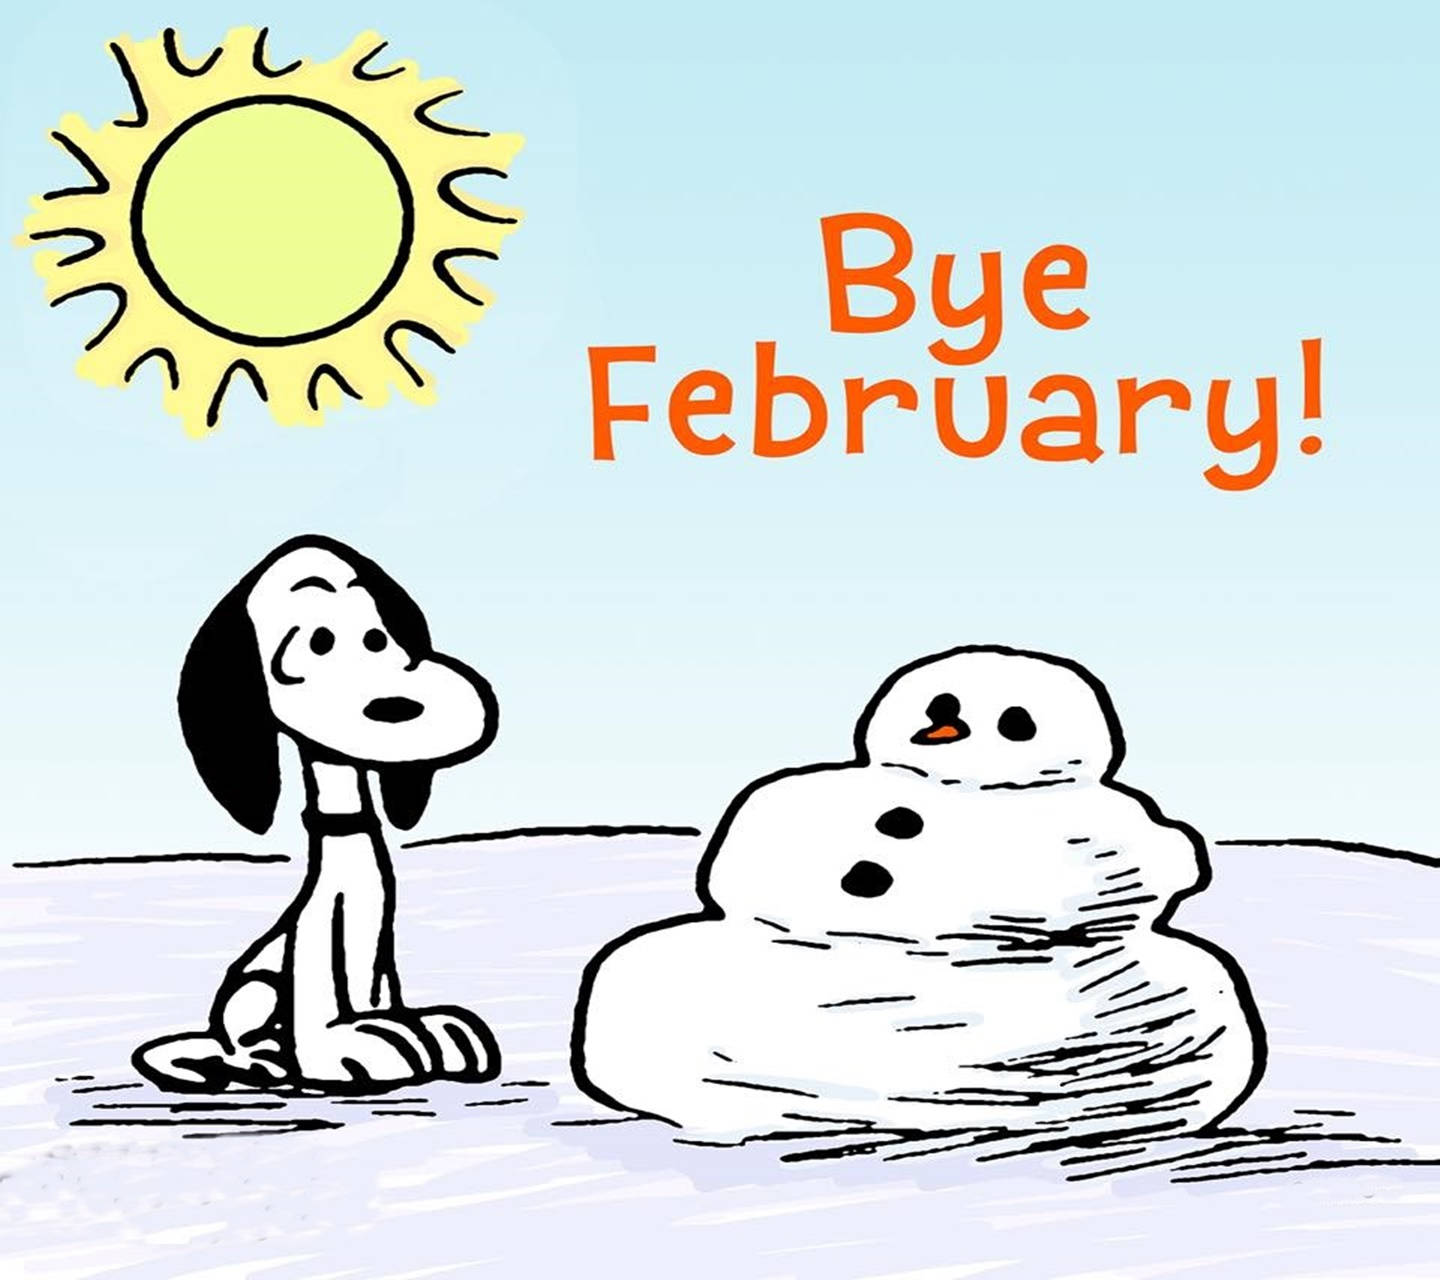 Say Goodbye To February With Snowman And Snoopy! Background